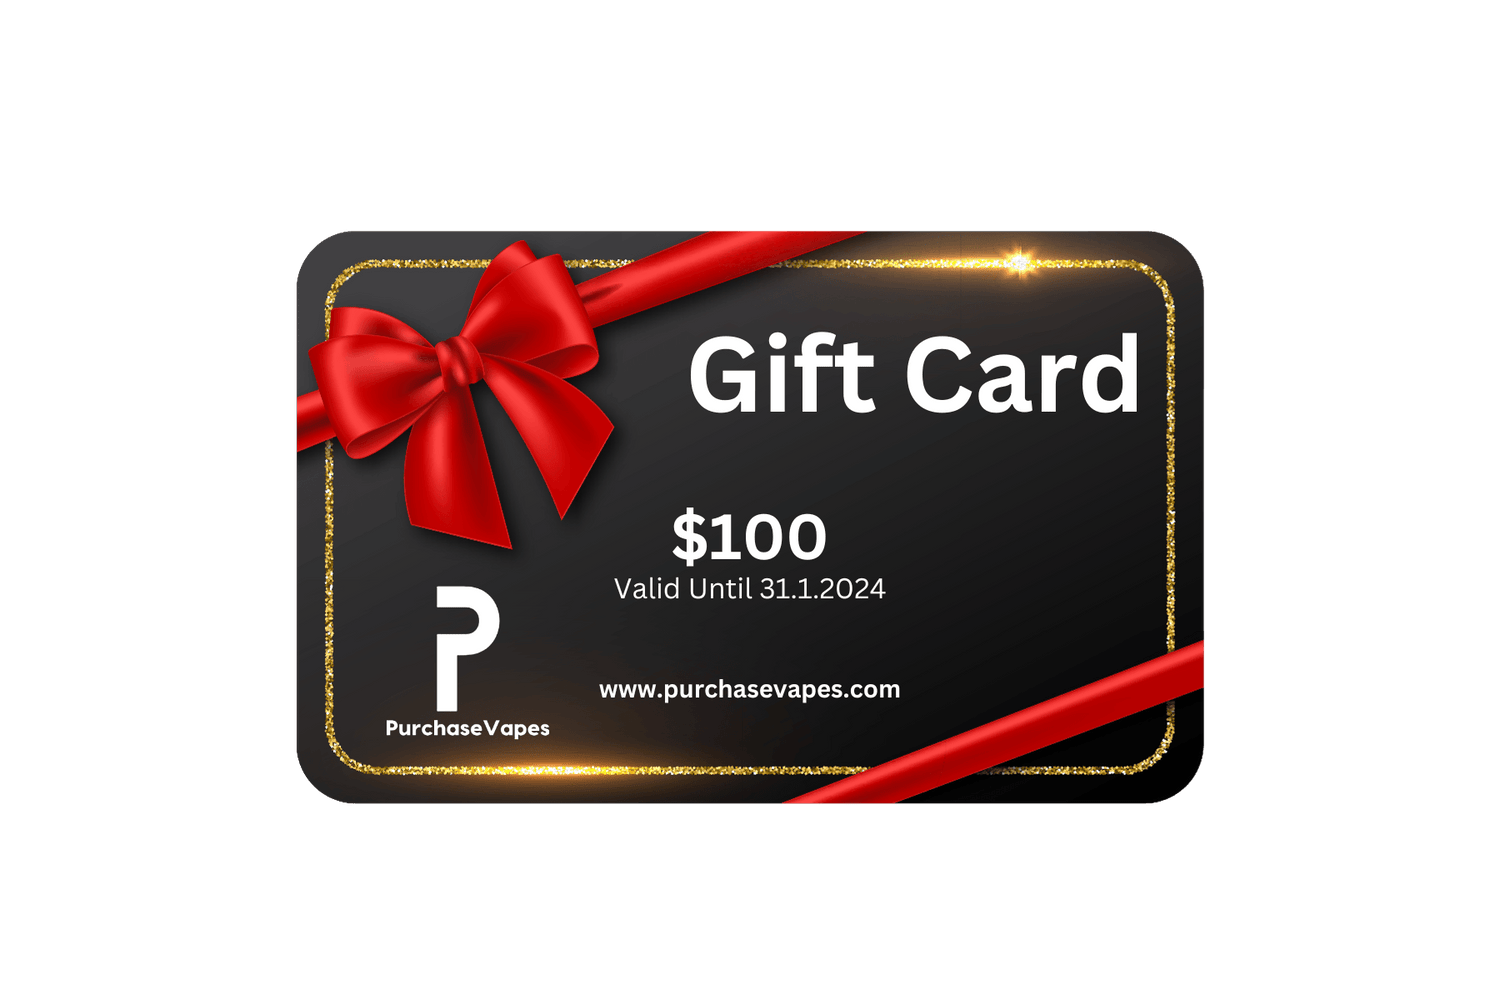 PurchaseVapes Gift Card - Purchasevapes